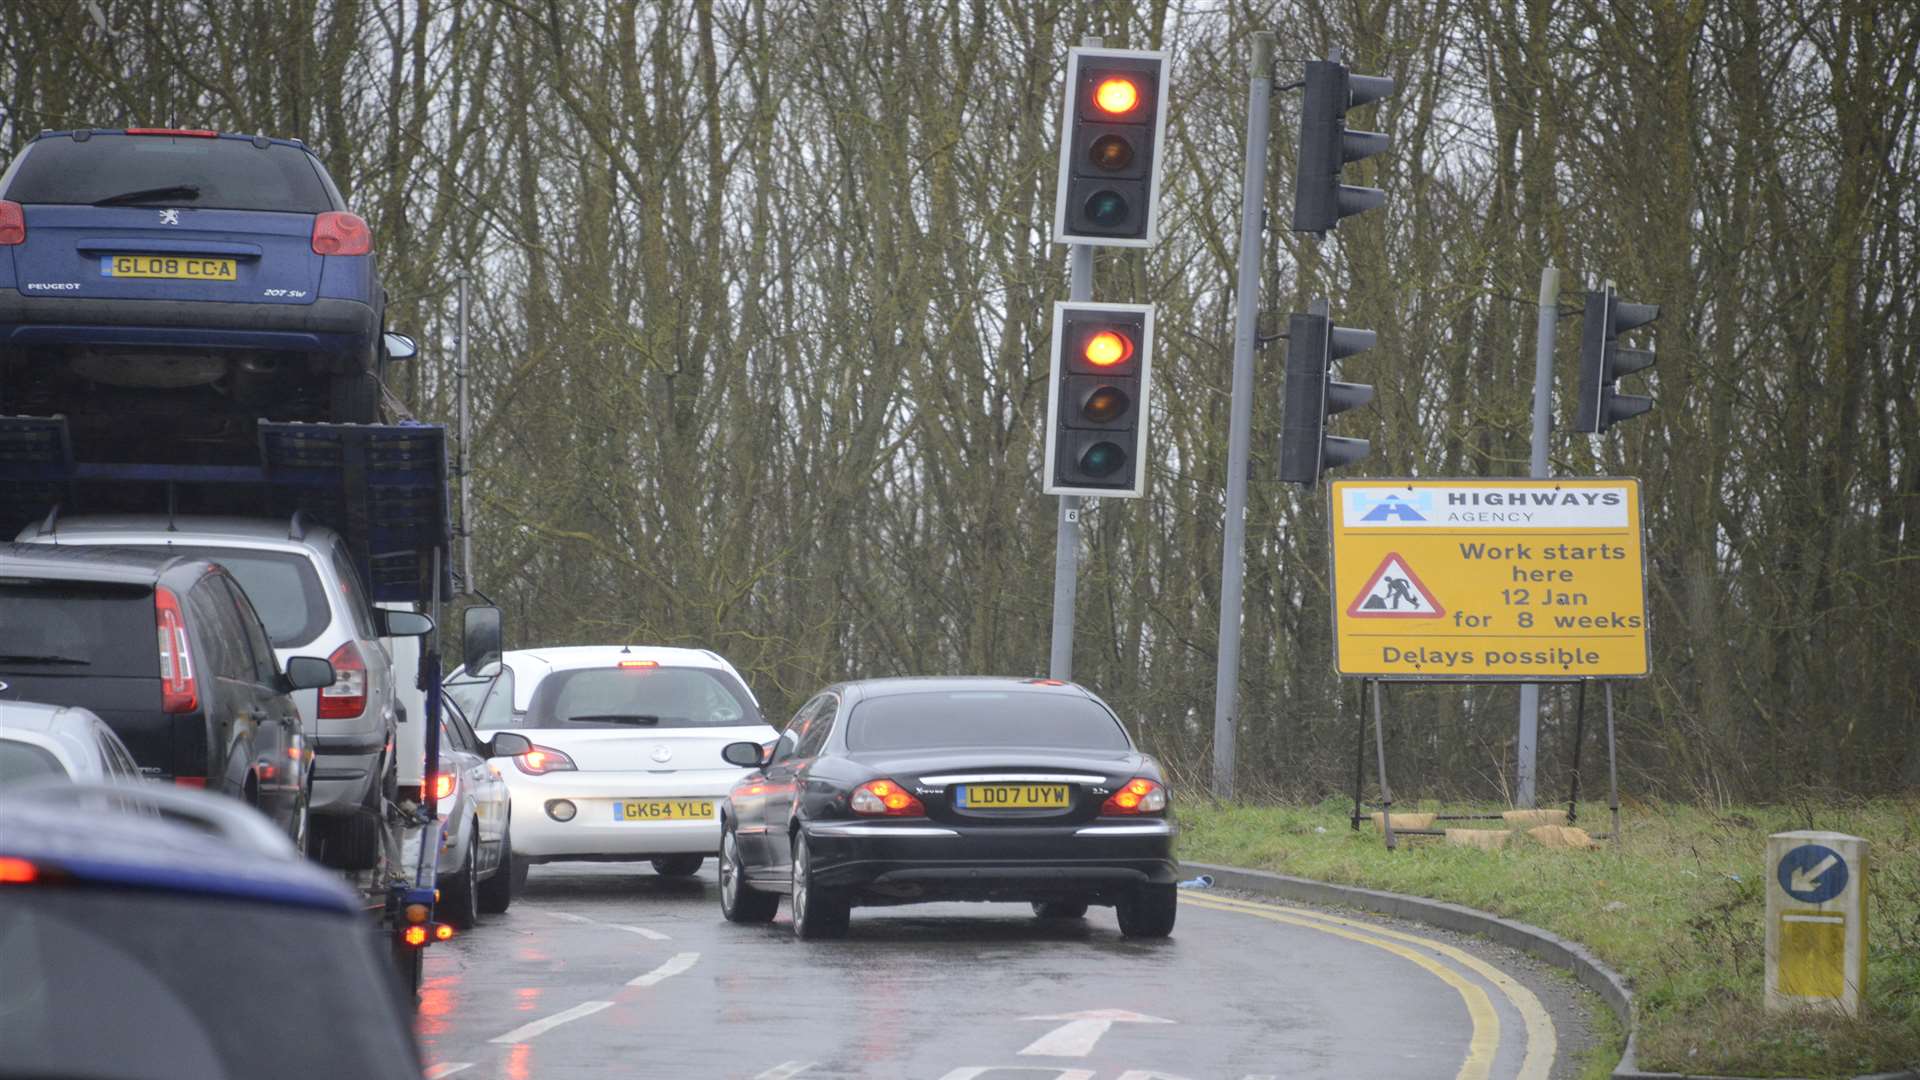 Drivers have faced long waits at the lights